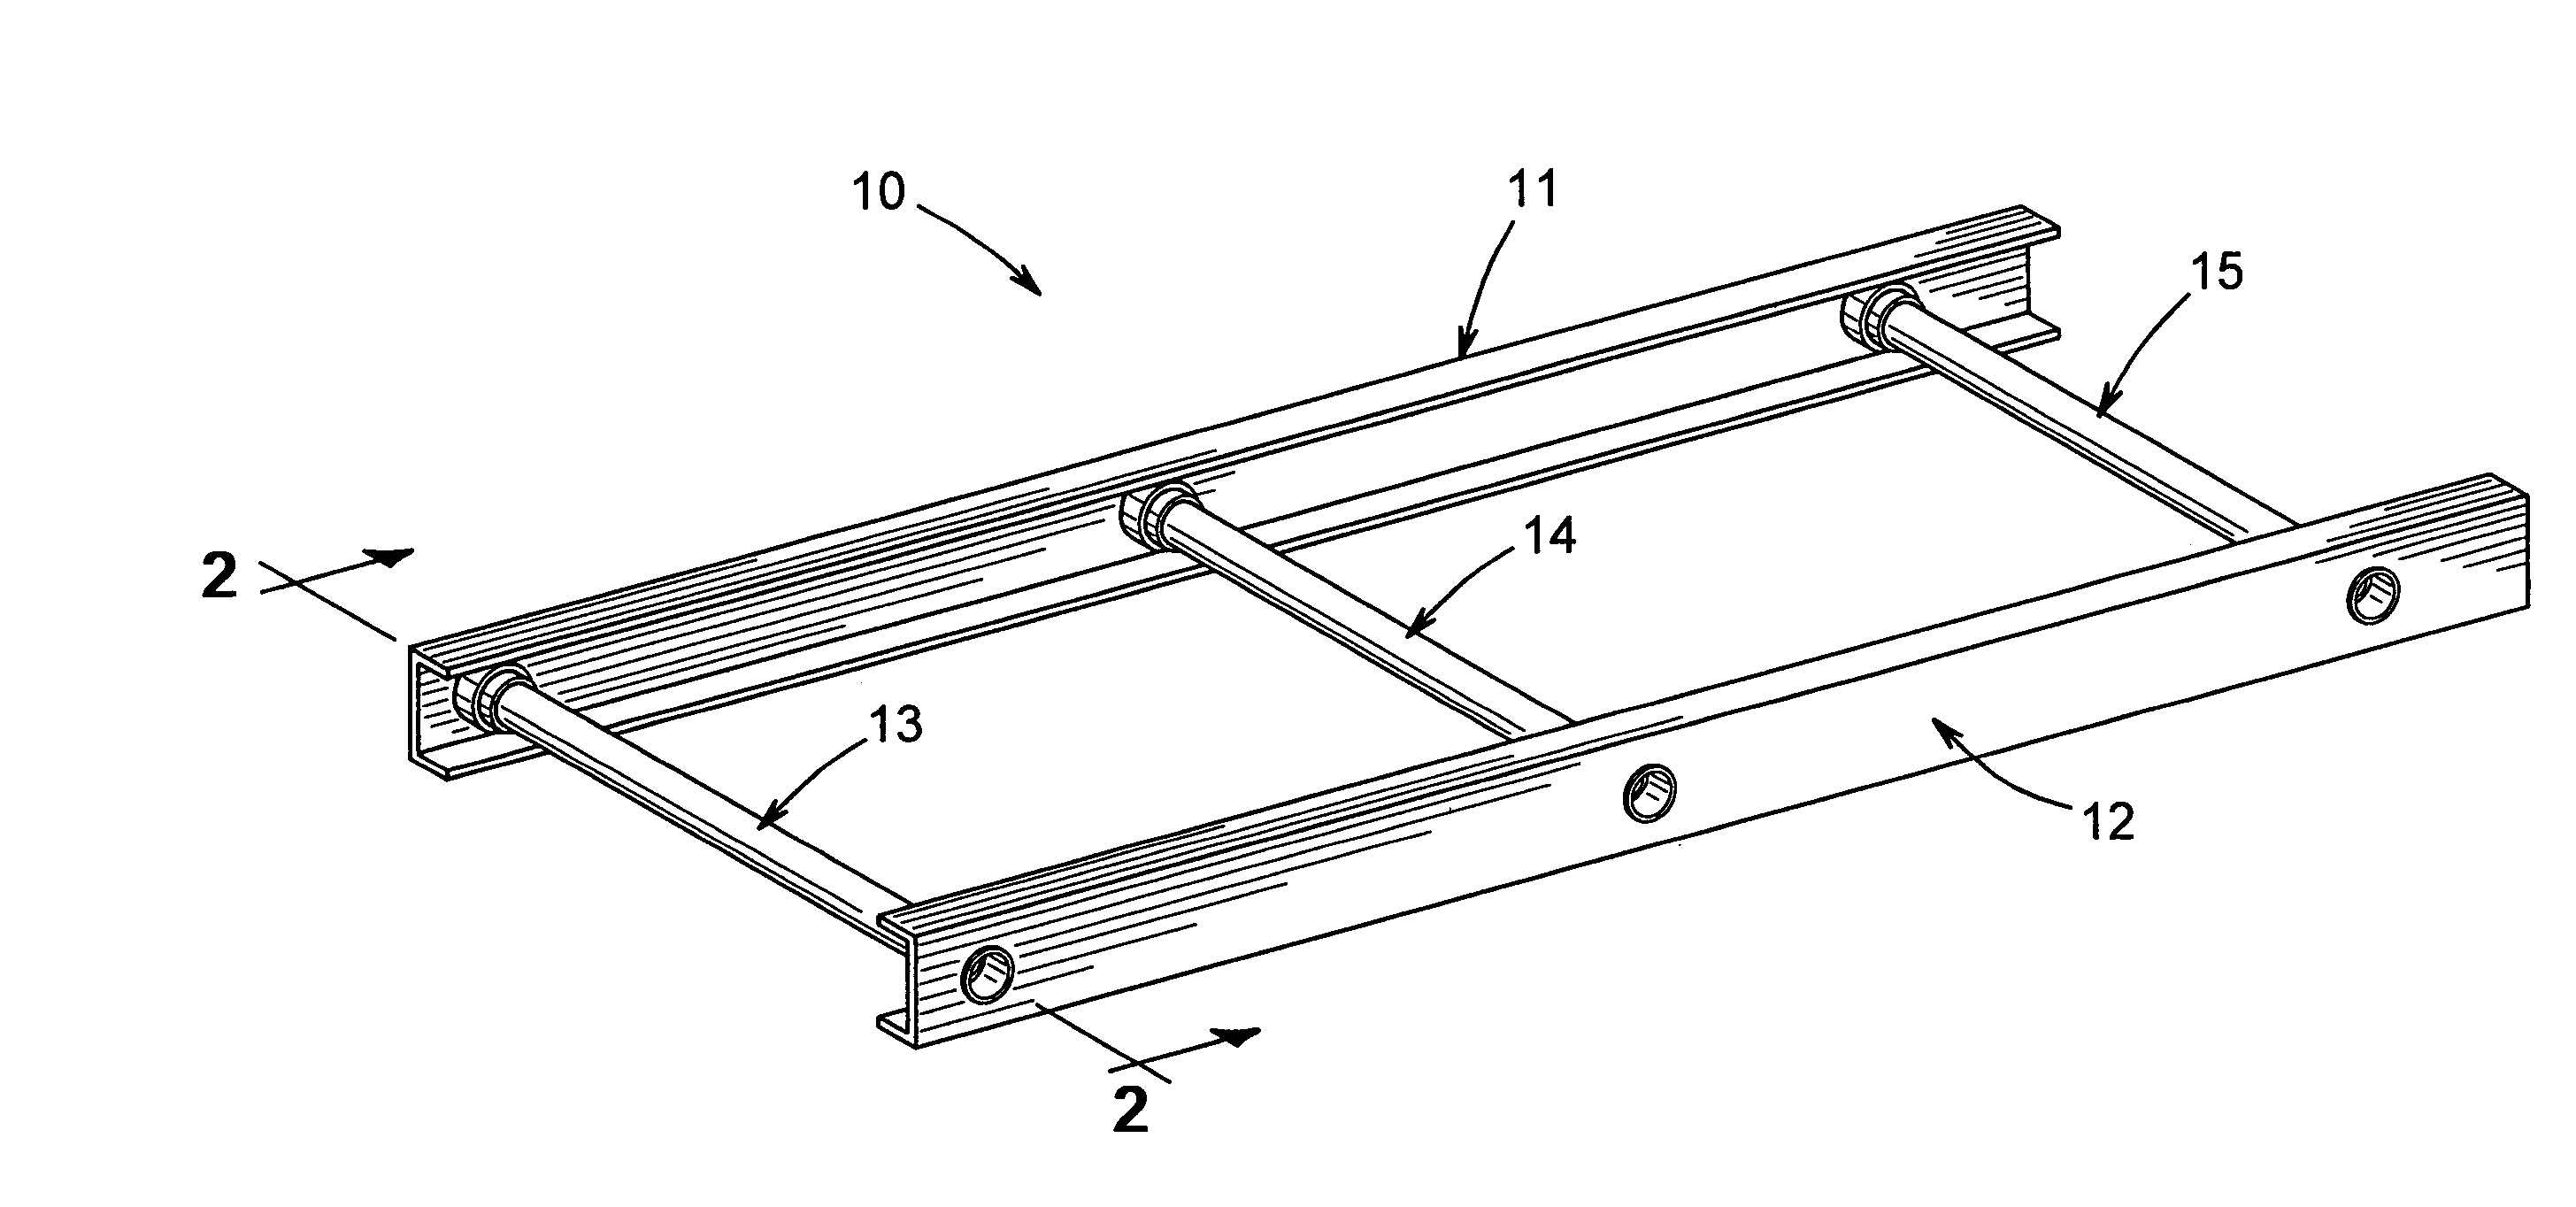 Bi-metallic structural component for vehicle frame assembly